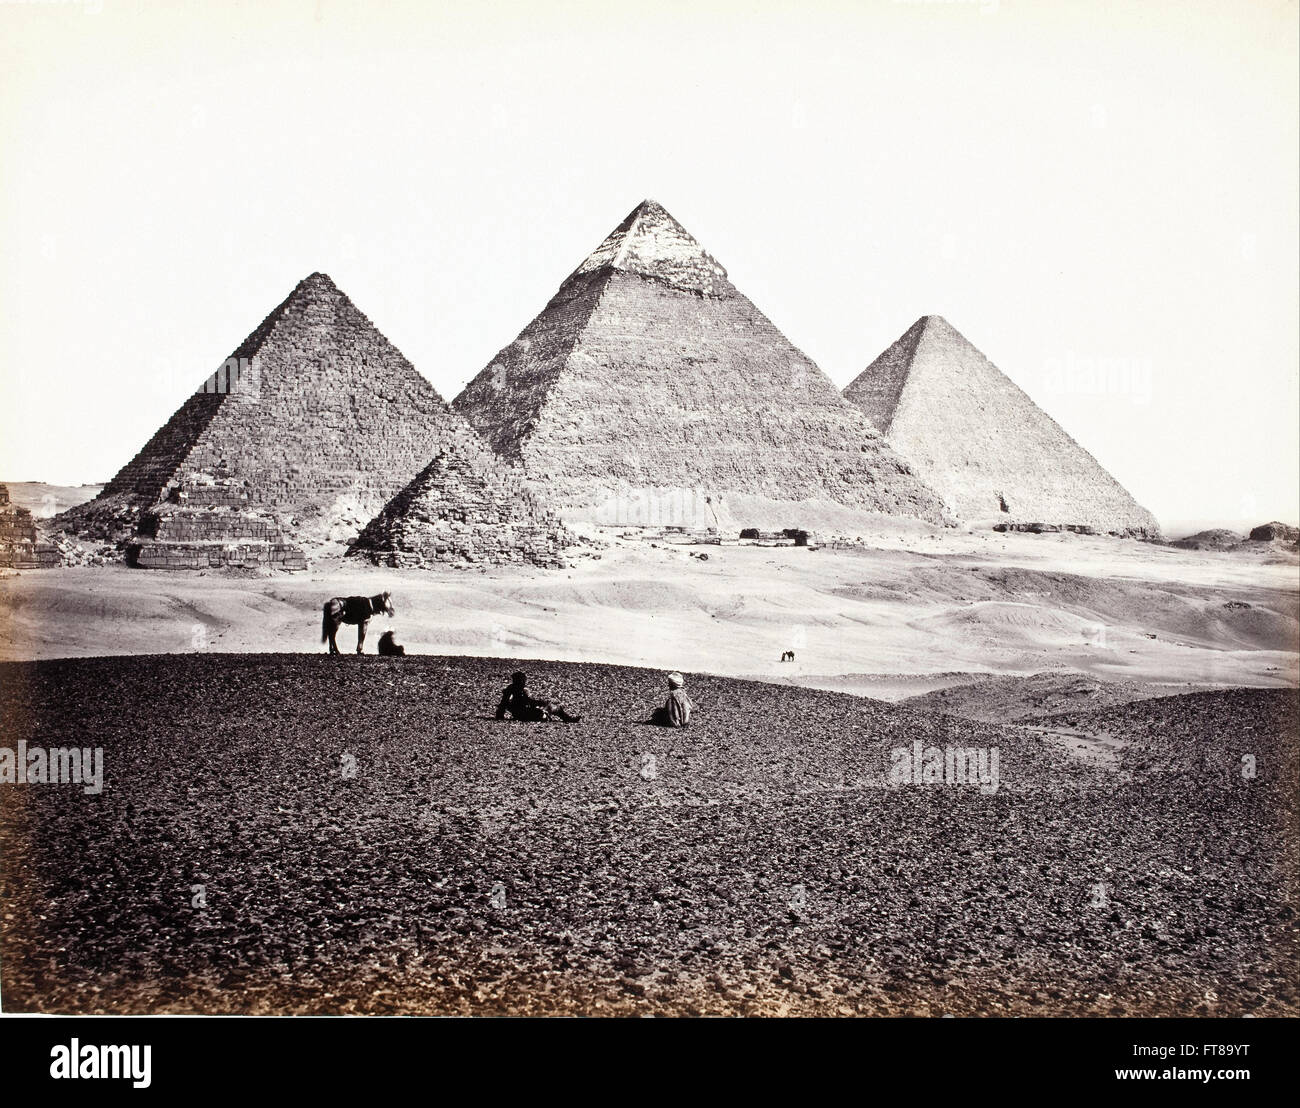 Francis Frith - Pyramids Of El-Geezeh (From The Southwest) -  Los Angeles County Museum of Art Stock Photo